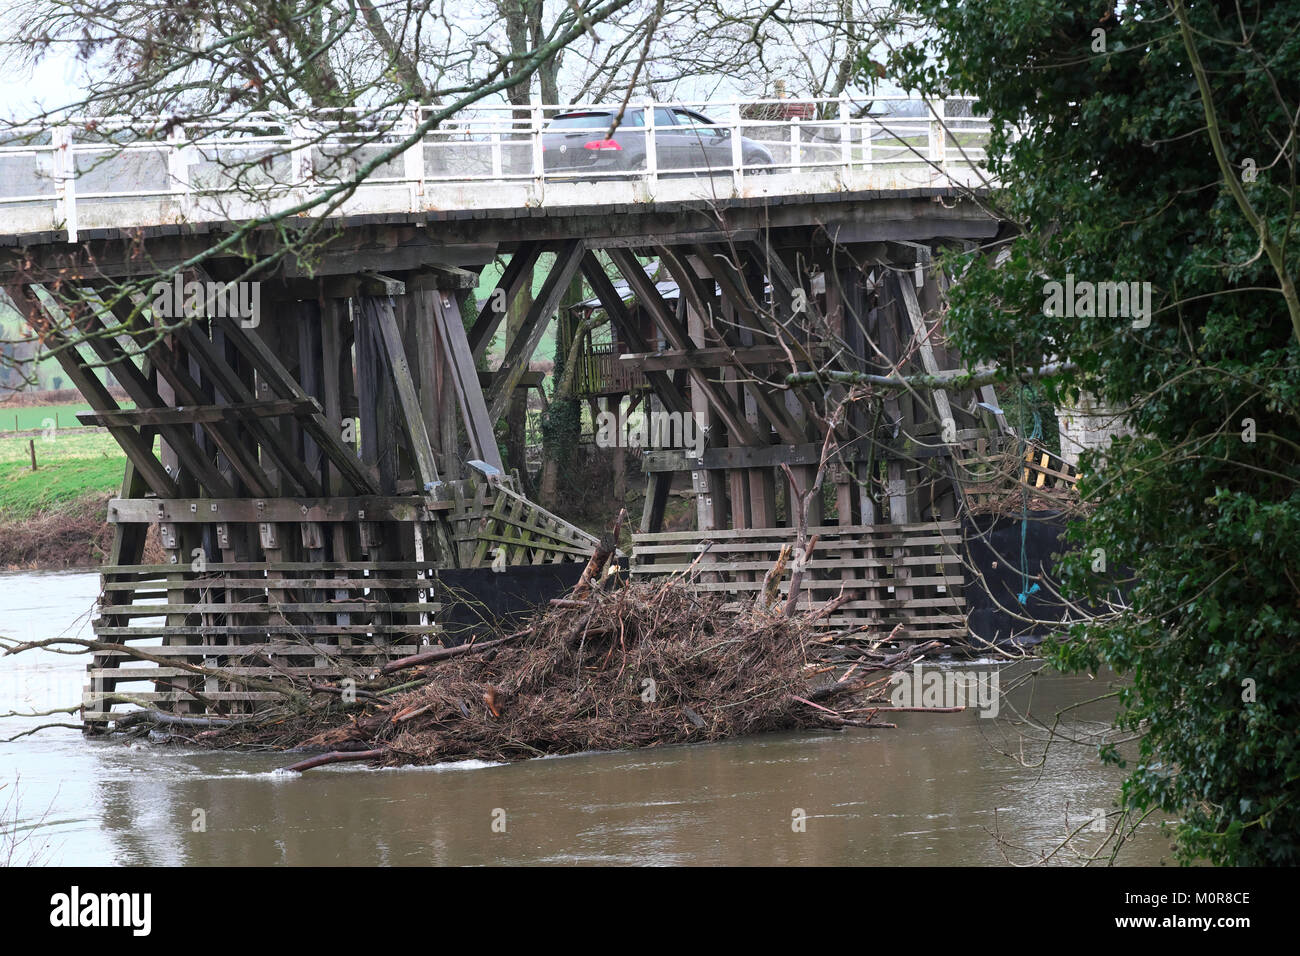 Whitney-on-Wye, Herefordshire, UK - Wednesday 24th January 2018 - Rain falls on the River Wye where river levels are high - large amounts of broken tree debris have already washed down from further upstream in Wales and are now piled up against the pillars of the old Toll Bridge at Whitney-on-Wye -  Photo Steven May / Alamy Live News Stock Photo